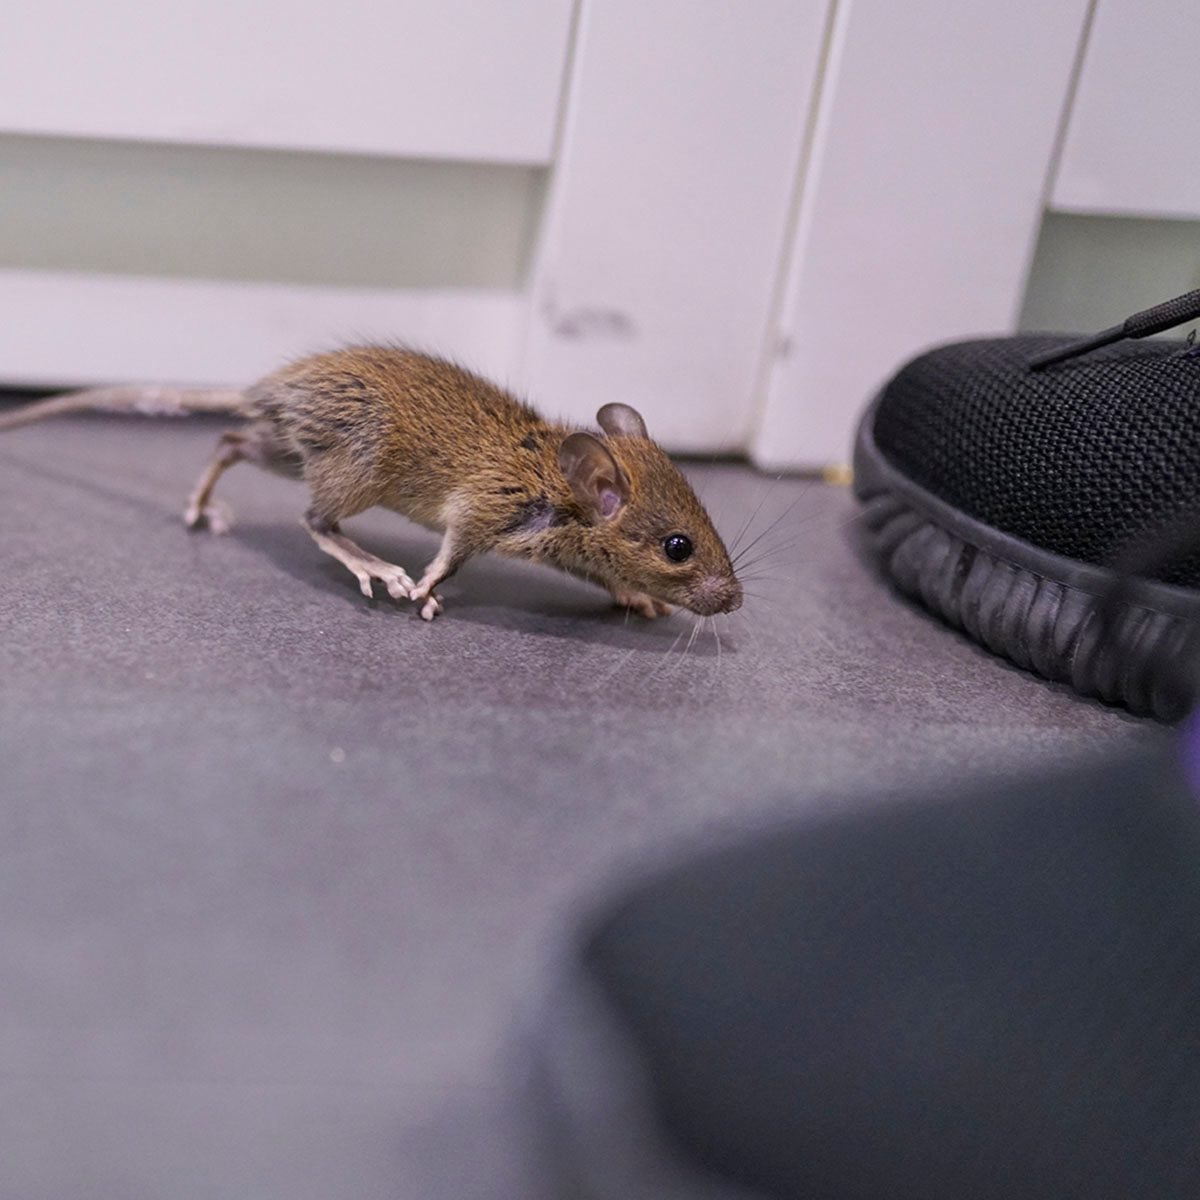 How to Catch a Mouse: 3 Best Tips and Tricks